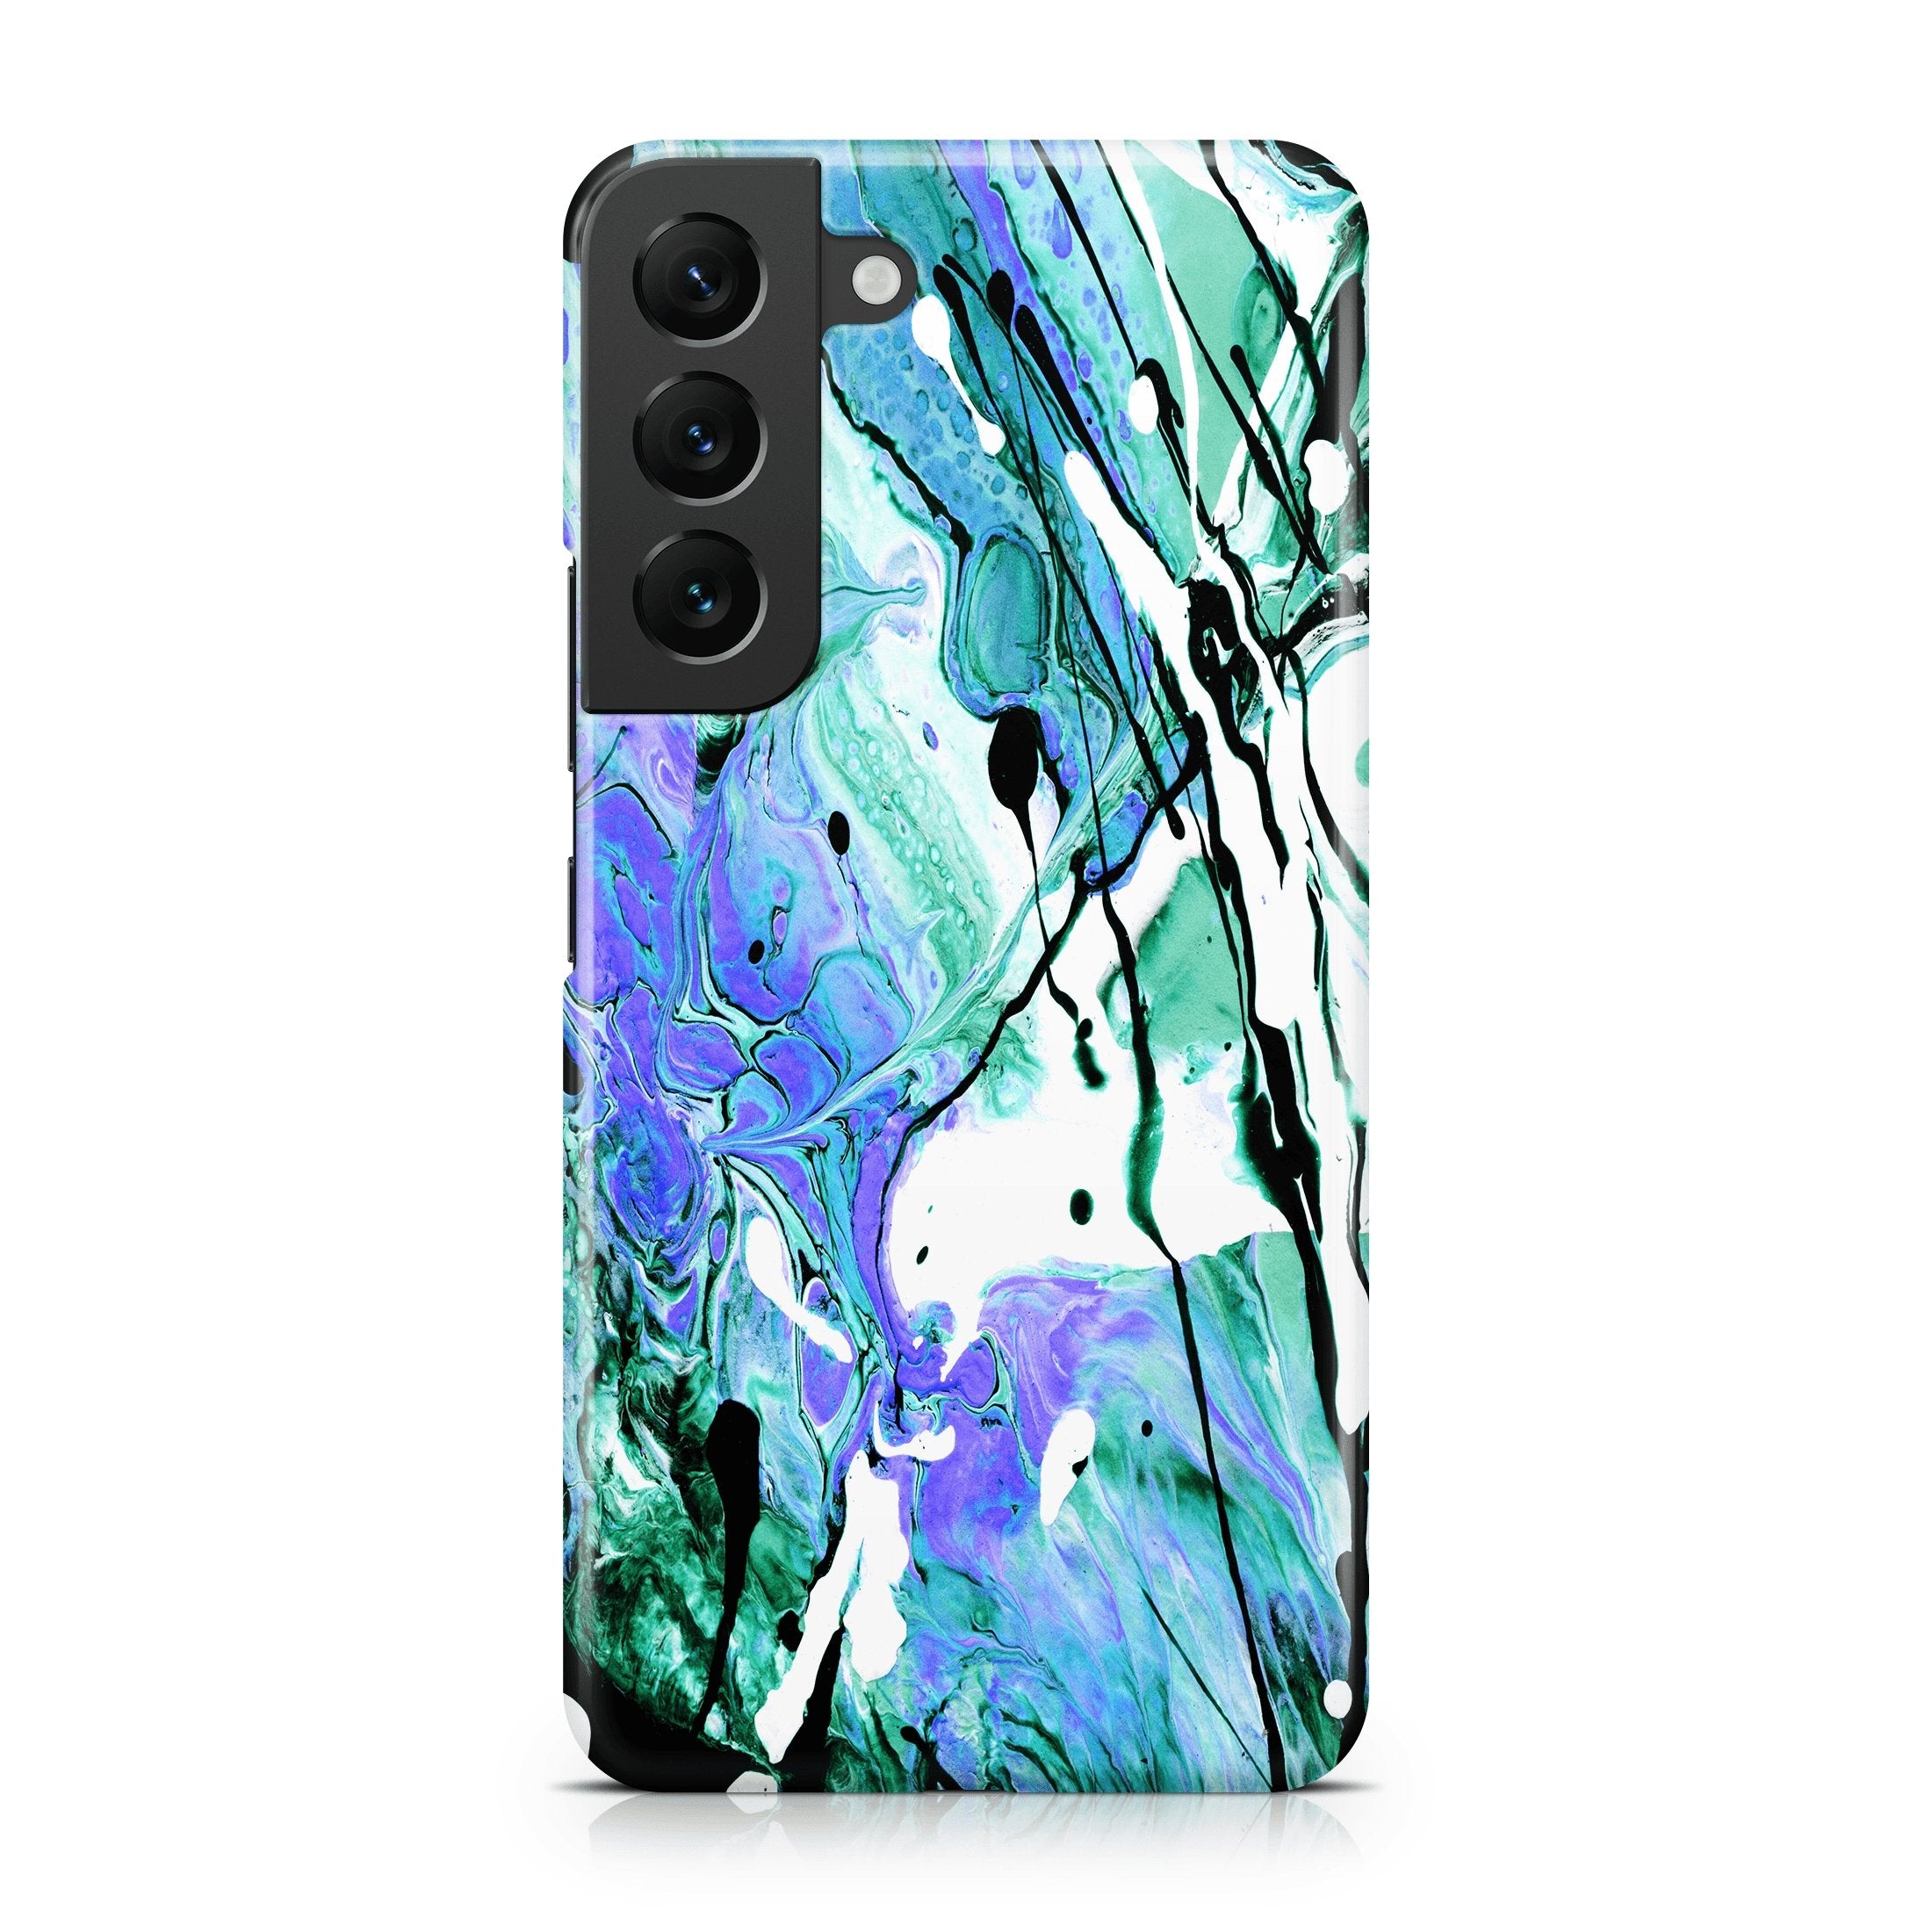 Blue Fluid Acrylic - Samsung phone case designs by CaseSwagger